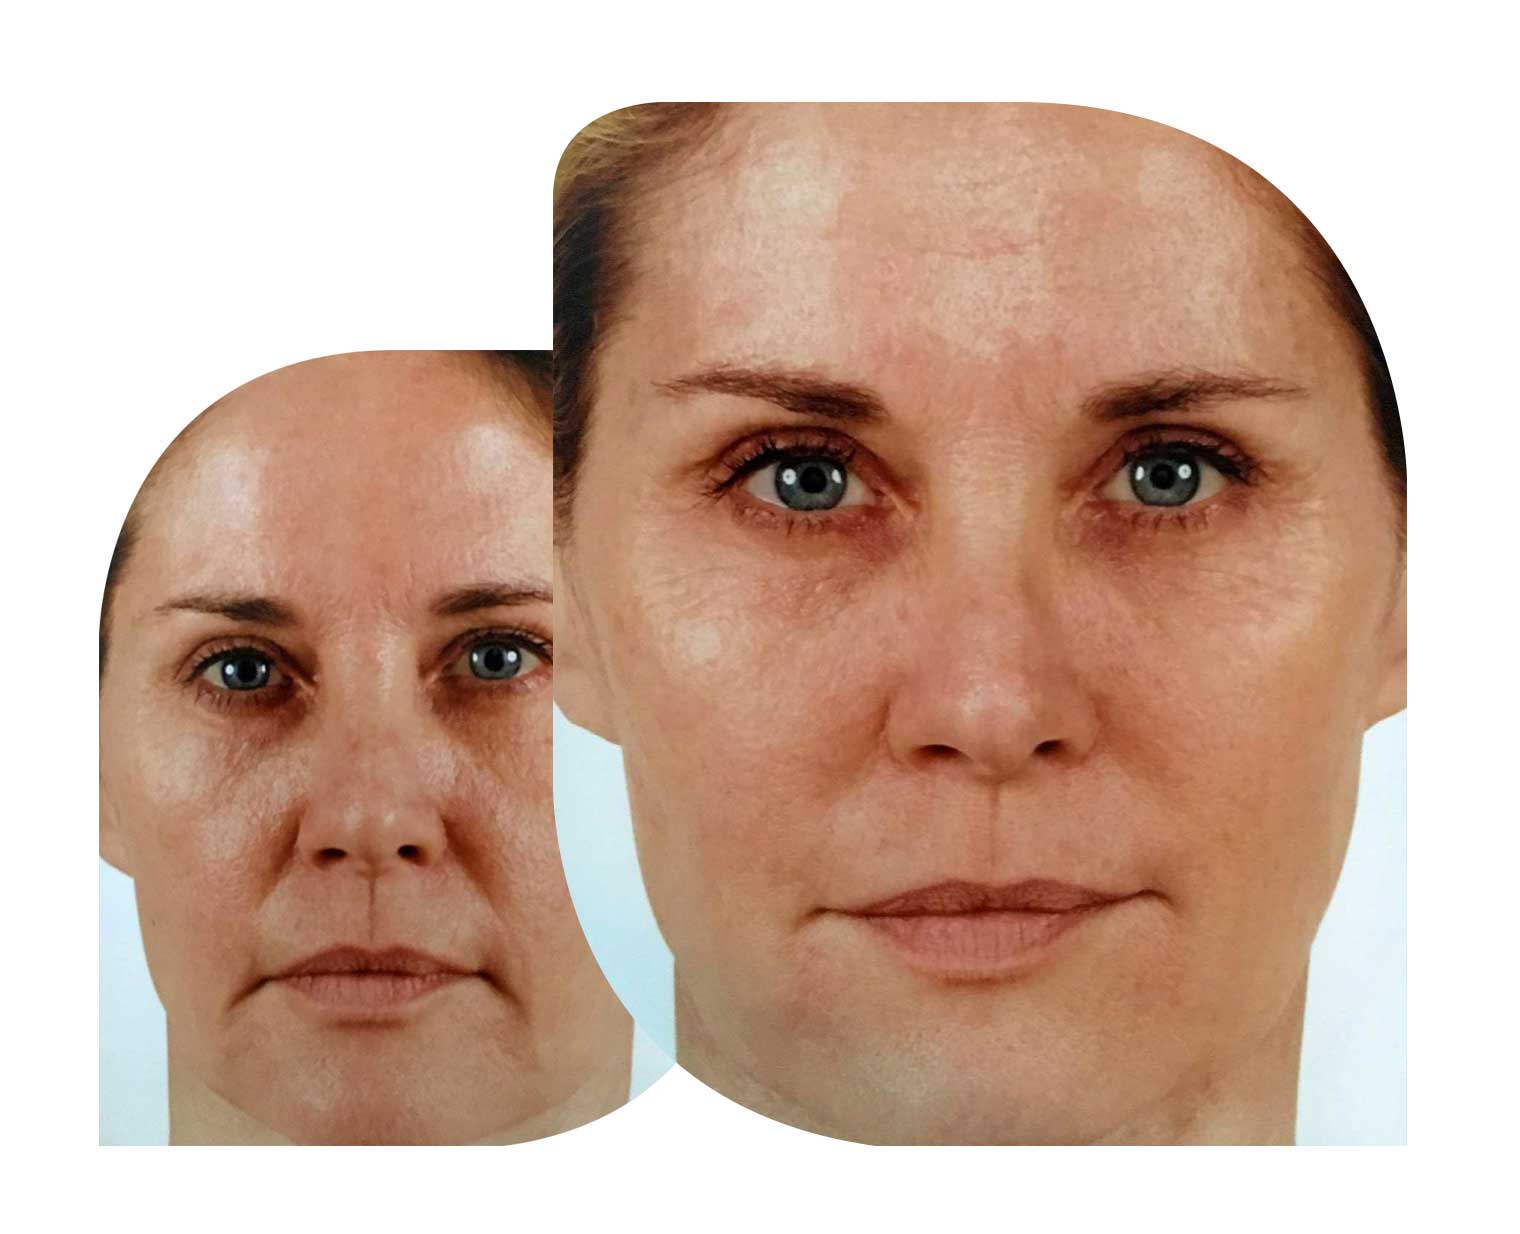 Overlapping headshot photos of derma fillers patient before and after.